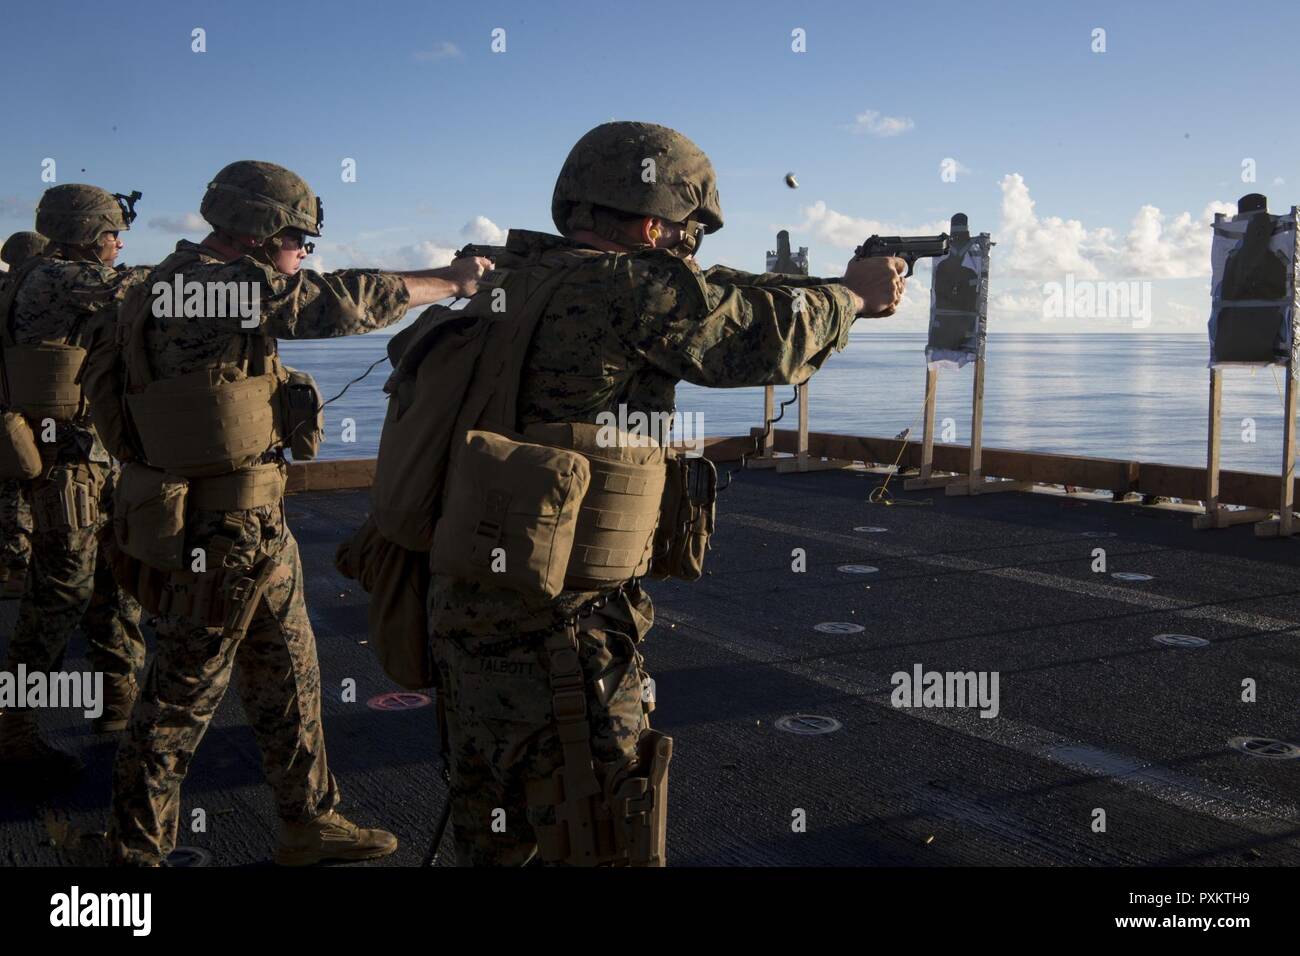 Marines with Combat Logistics Battalion 31 fire M1911 .45-caliber pistols during marksmanship training aboard the USS Bonhomme Richard (LHD 6), June 15, 2017. CLB-31 is permanently assigned to the 31st MEU and provides support for all elements of the MEU. The 31st MEU partners with the Navy’s Amphibious Squadron 11 to form the amphibious component of the Bonhomme Richard Expeditionary Strike Group. The 31st MEU and PHIBRON 11 combine to provide a cohesive blue-green team capable of accomplishing a variety of missions across the Indo-Asia-Pacific region. Stock Photo